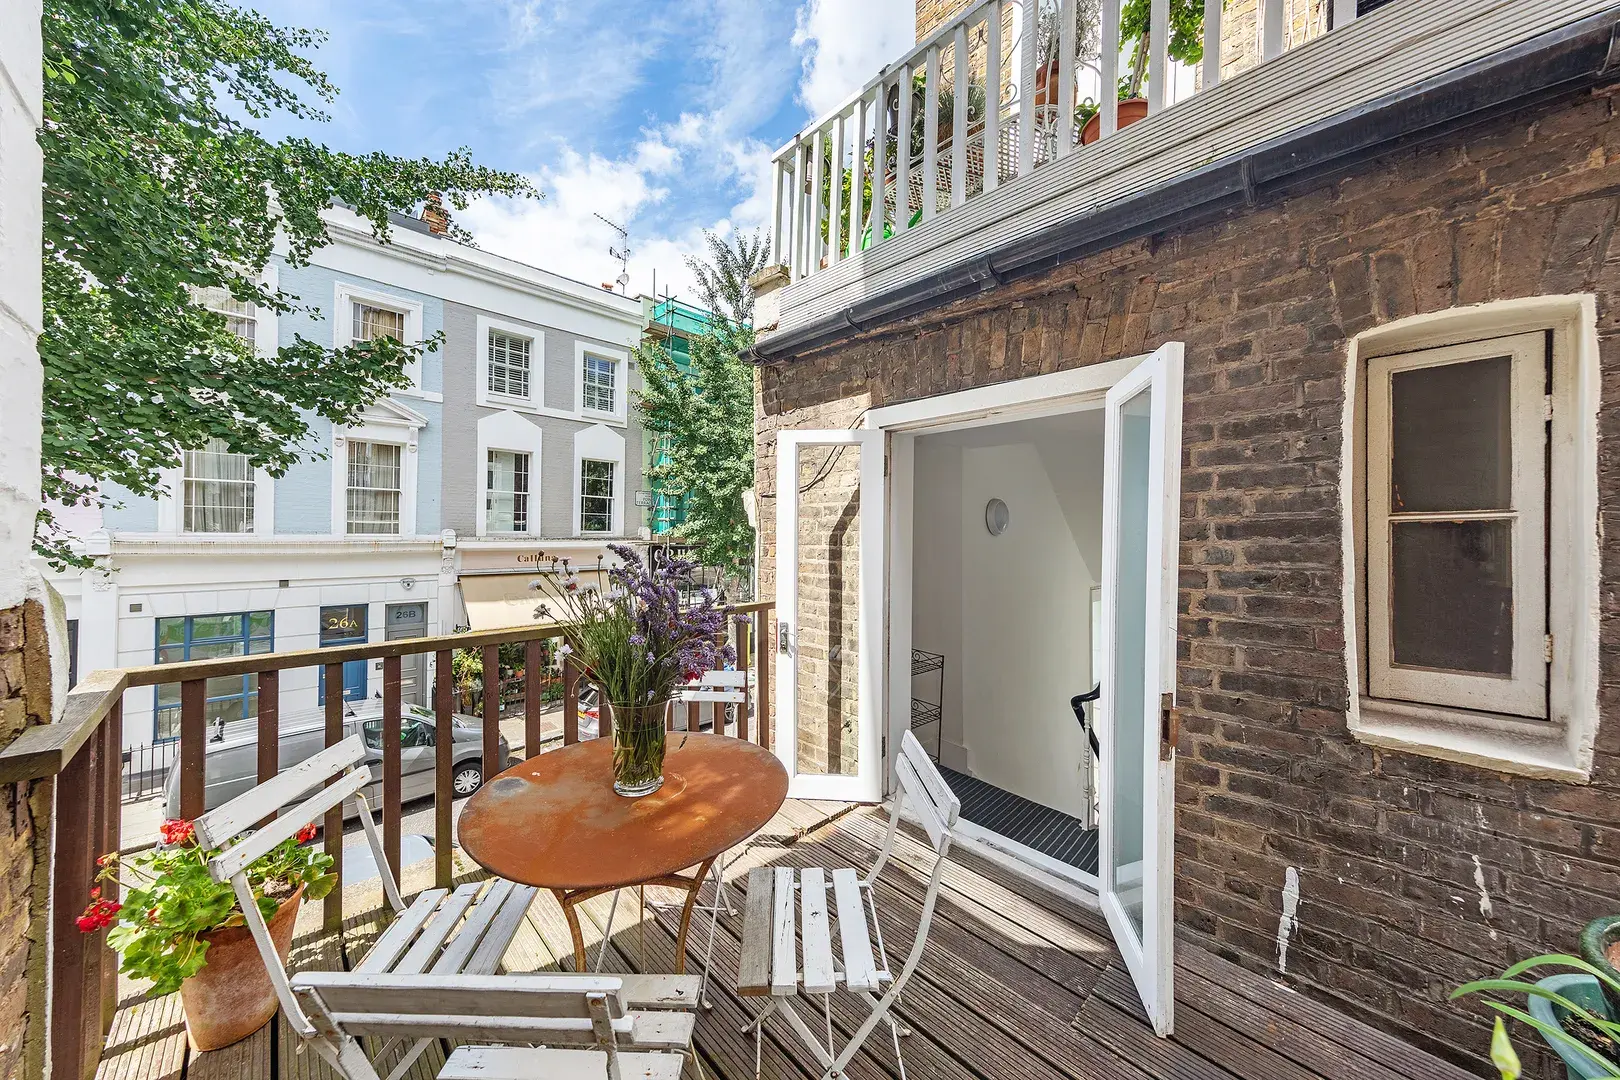 Westbourne Park Rd, holiday home in Notting Hill, London